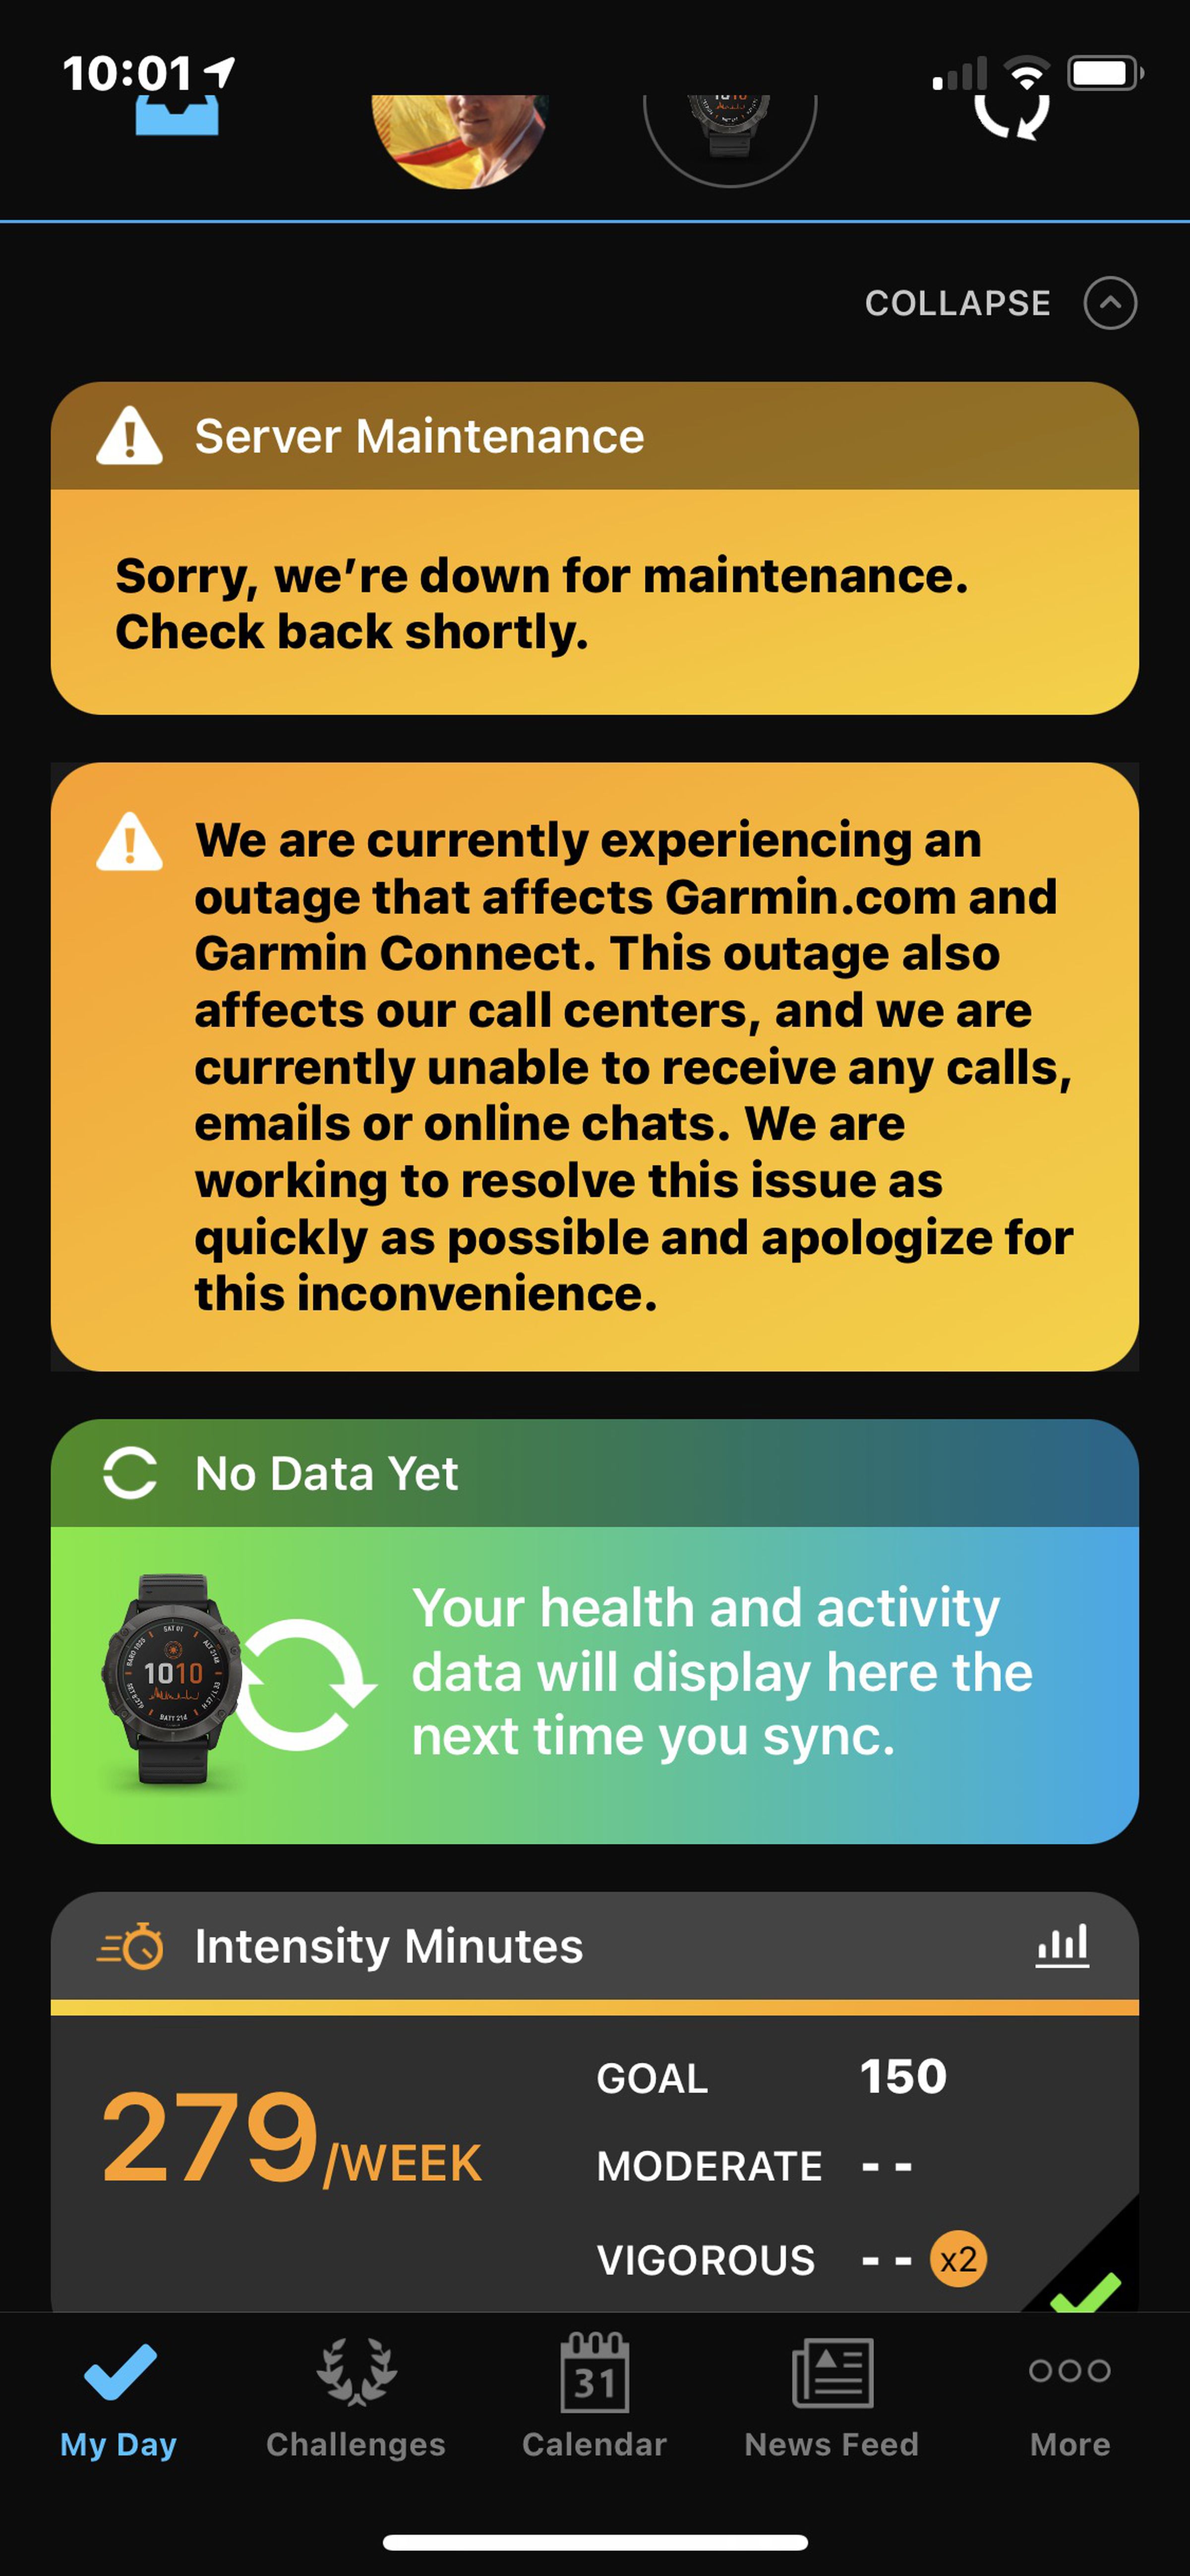 The outage as seen from the Garmin Connect app.